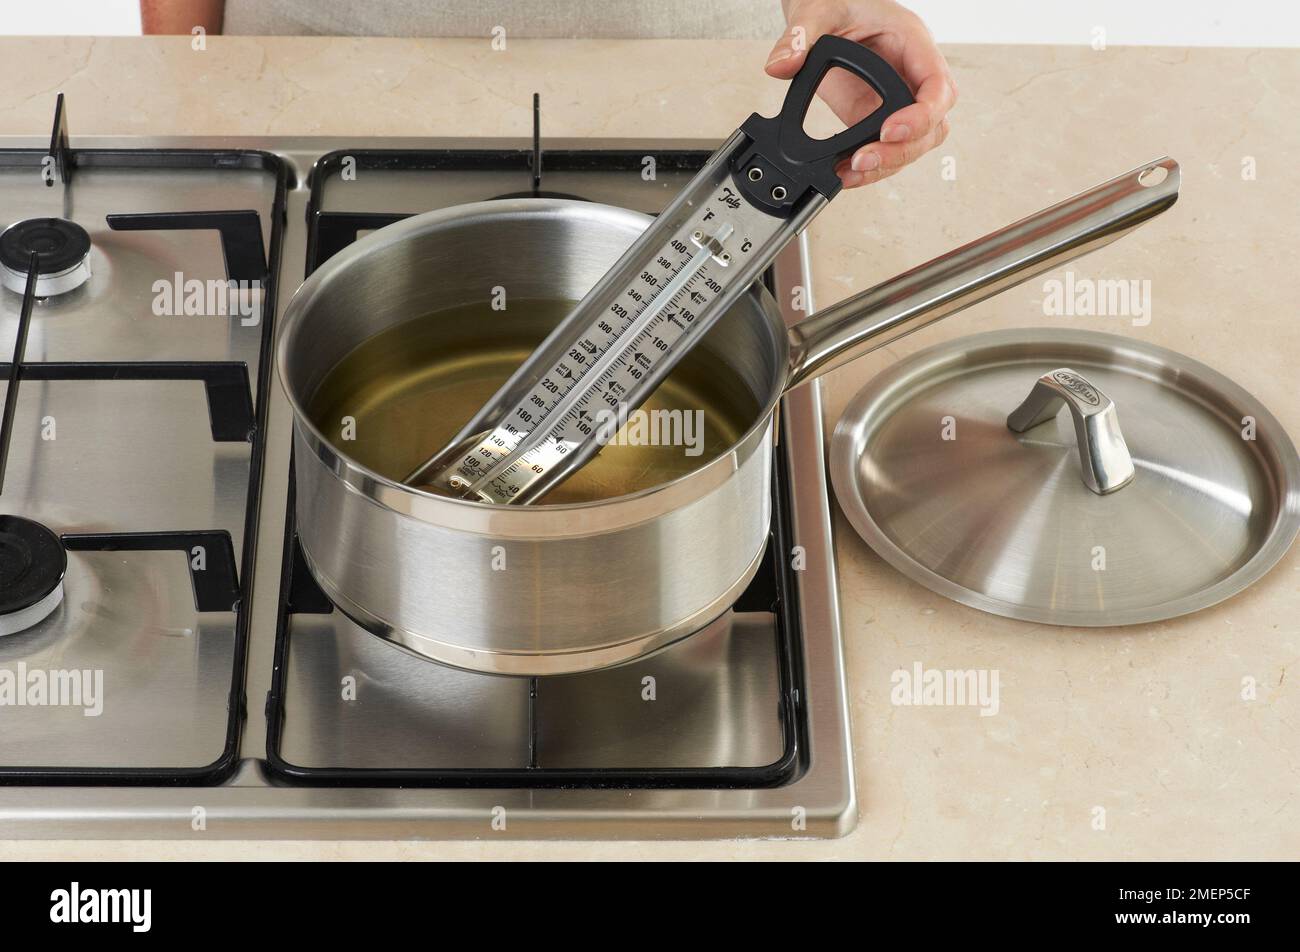 Heating oil in pan and checking temperature with thermometer Stock Photo